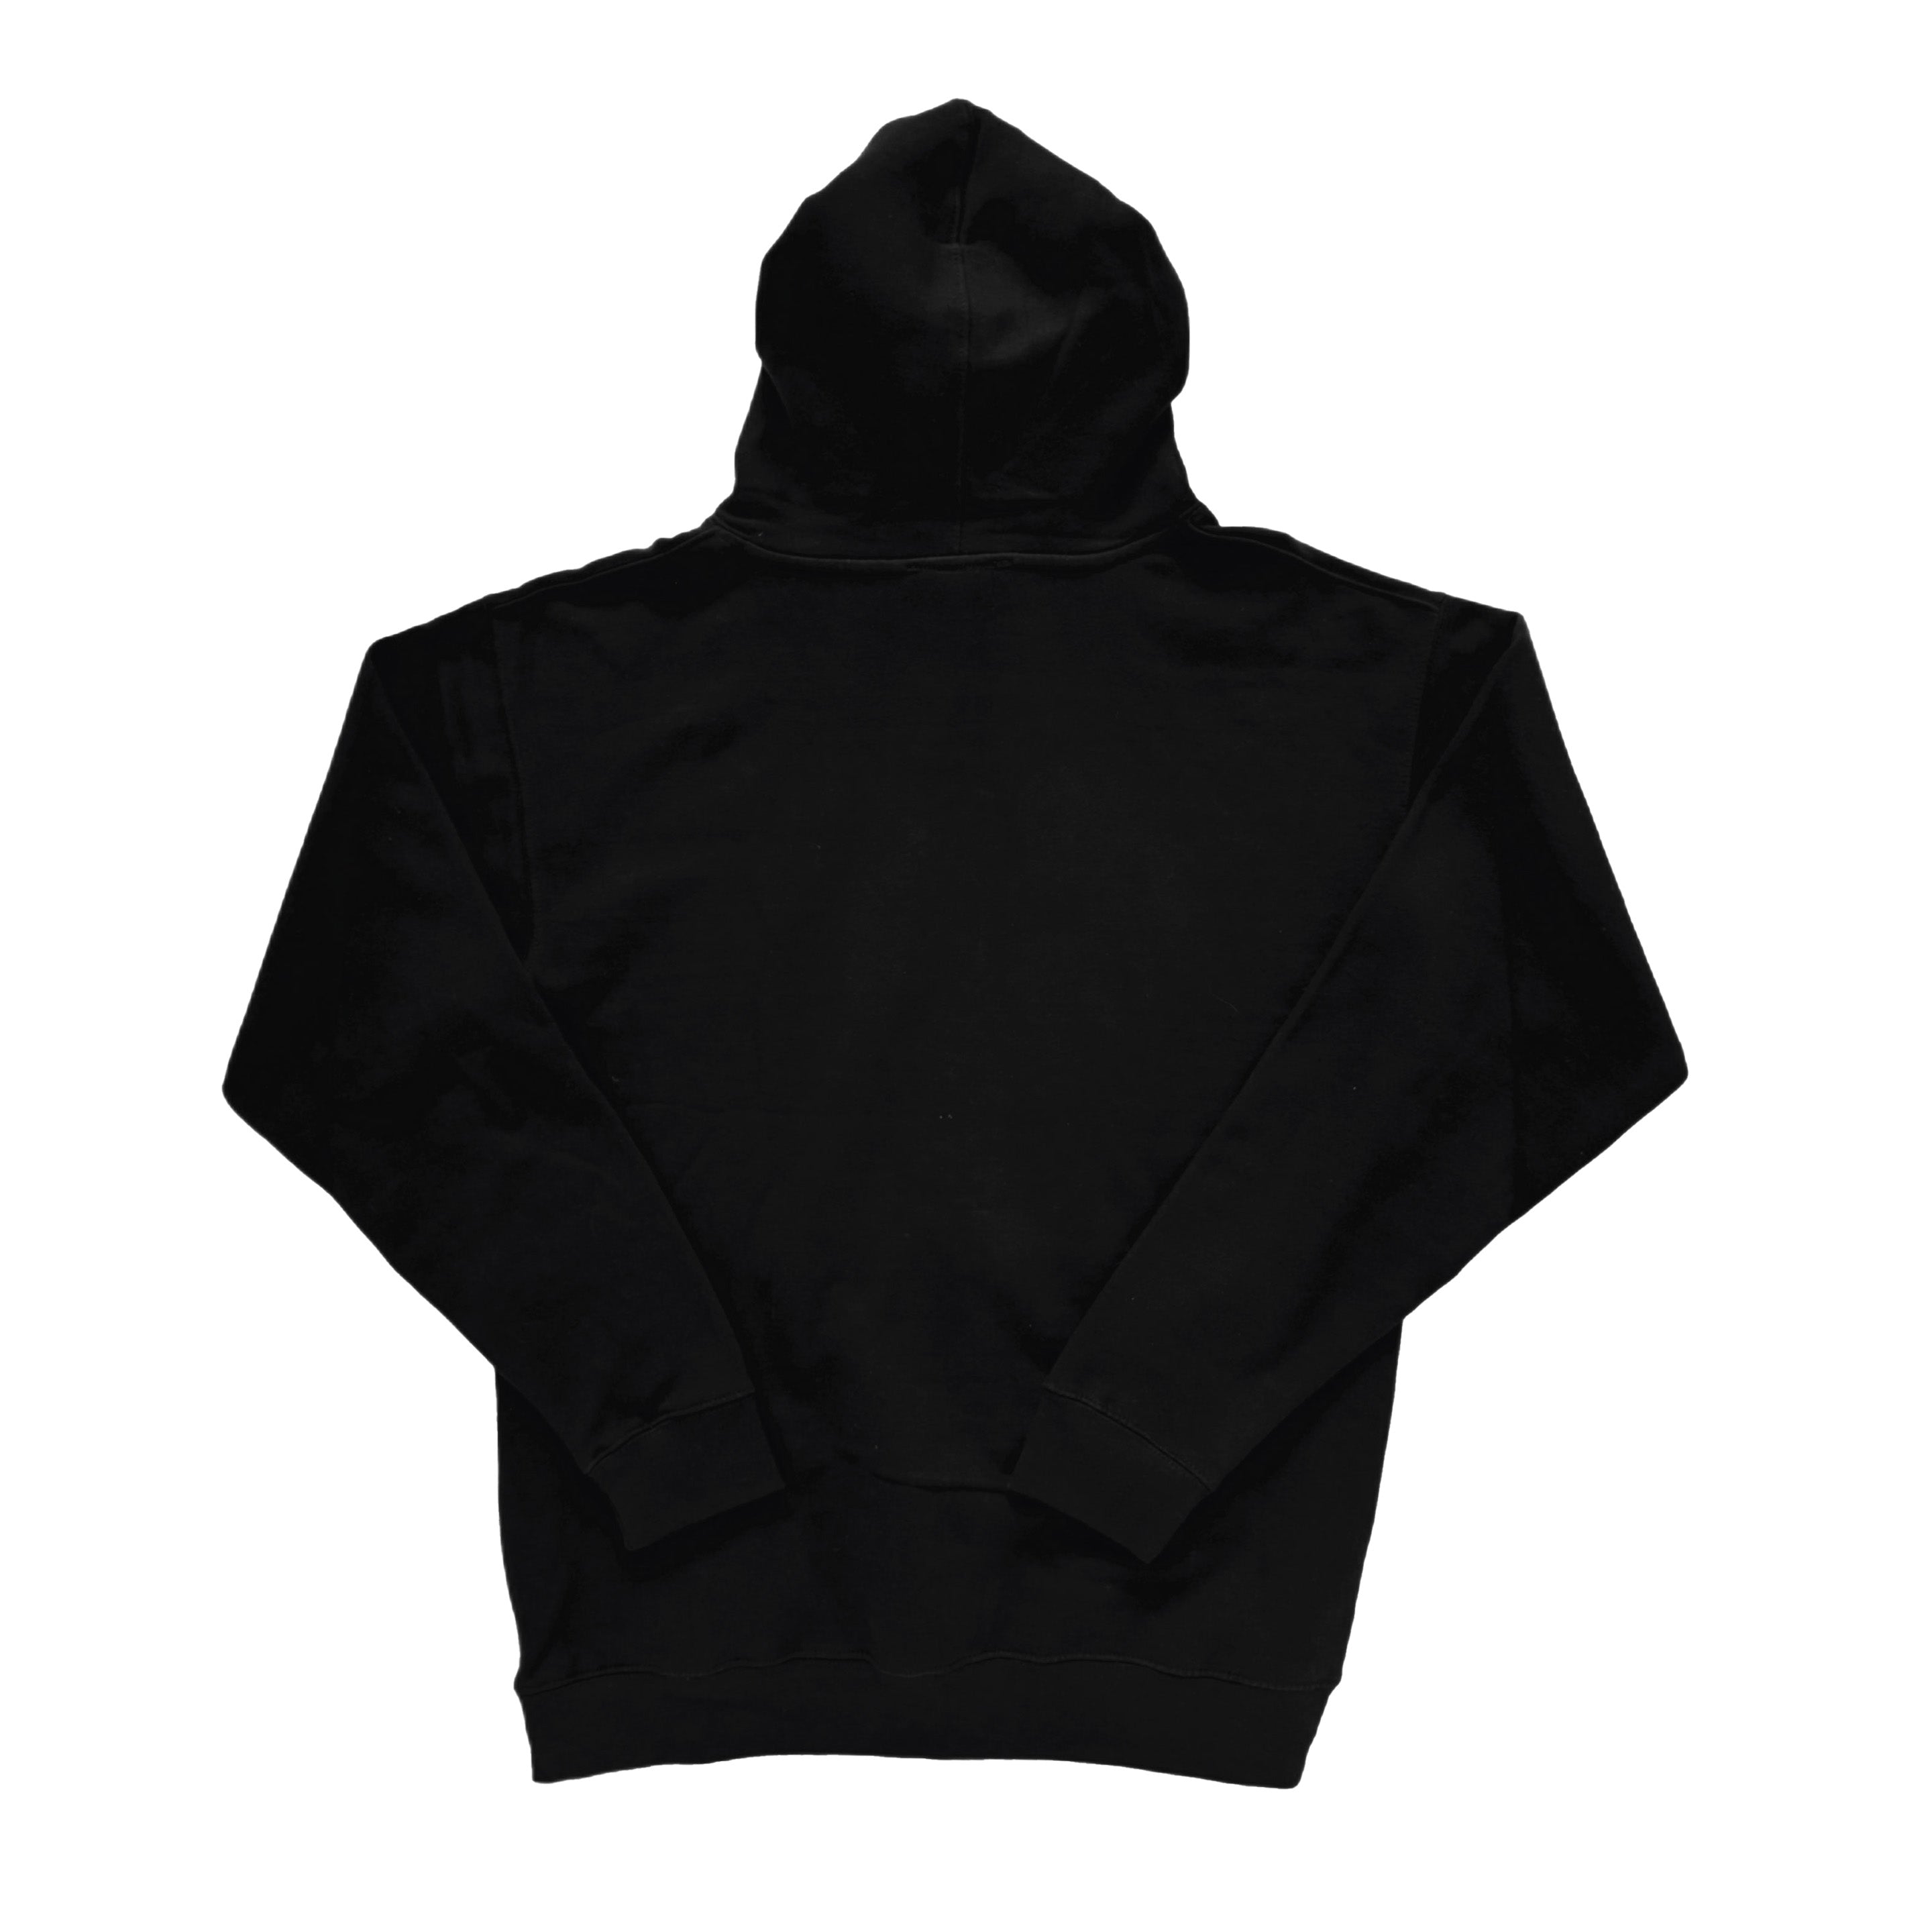 Premium Embroidered Calle Hoodie